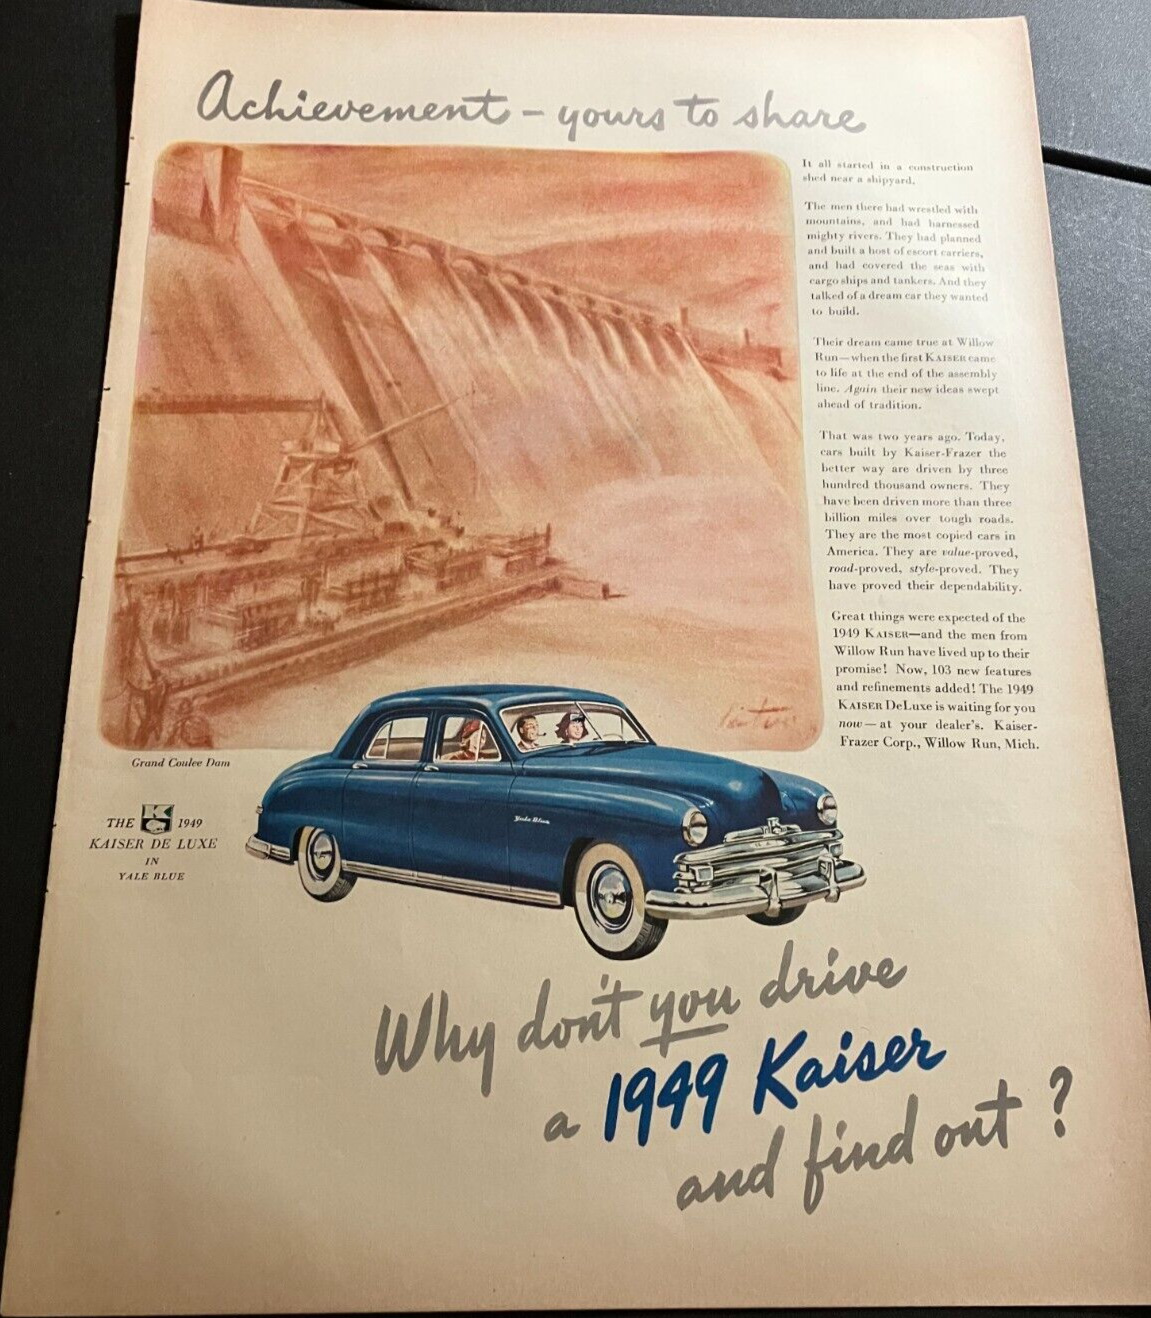 Yale Blue 1949 Kaiser De Luxe - Vintage Print Ad / Wall Art - Grand Coulee Dam